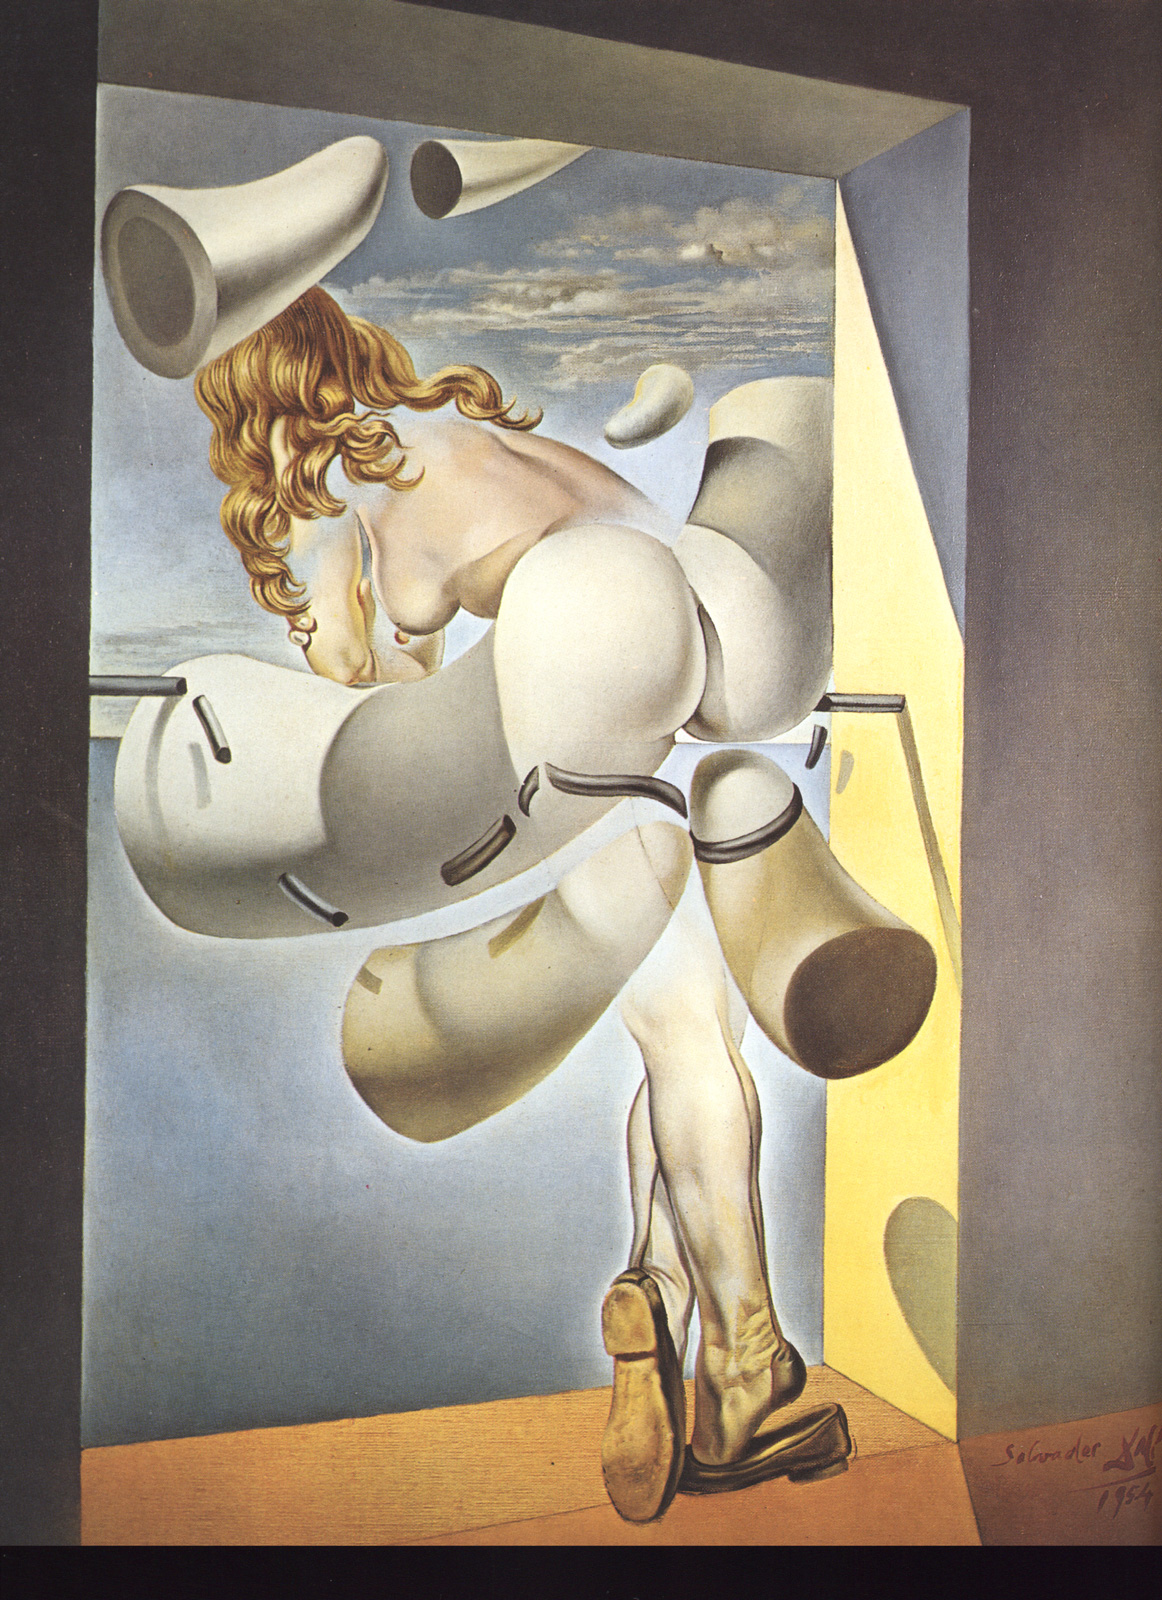 Young Virgin Auto-Sodomized by the Horns of Her Own Chastity, painted by Salvador Dalí, 1954.jpg